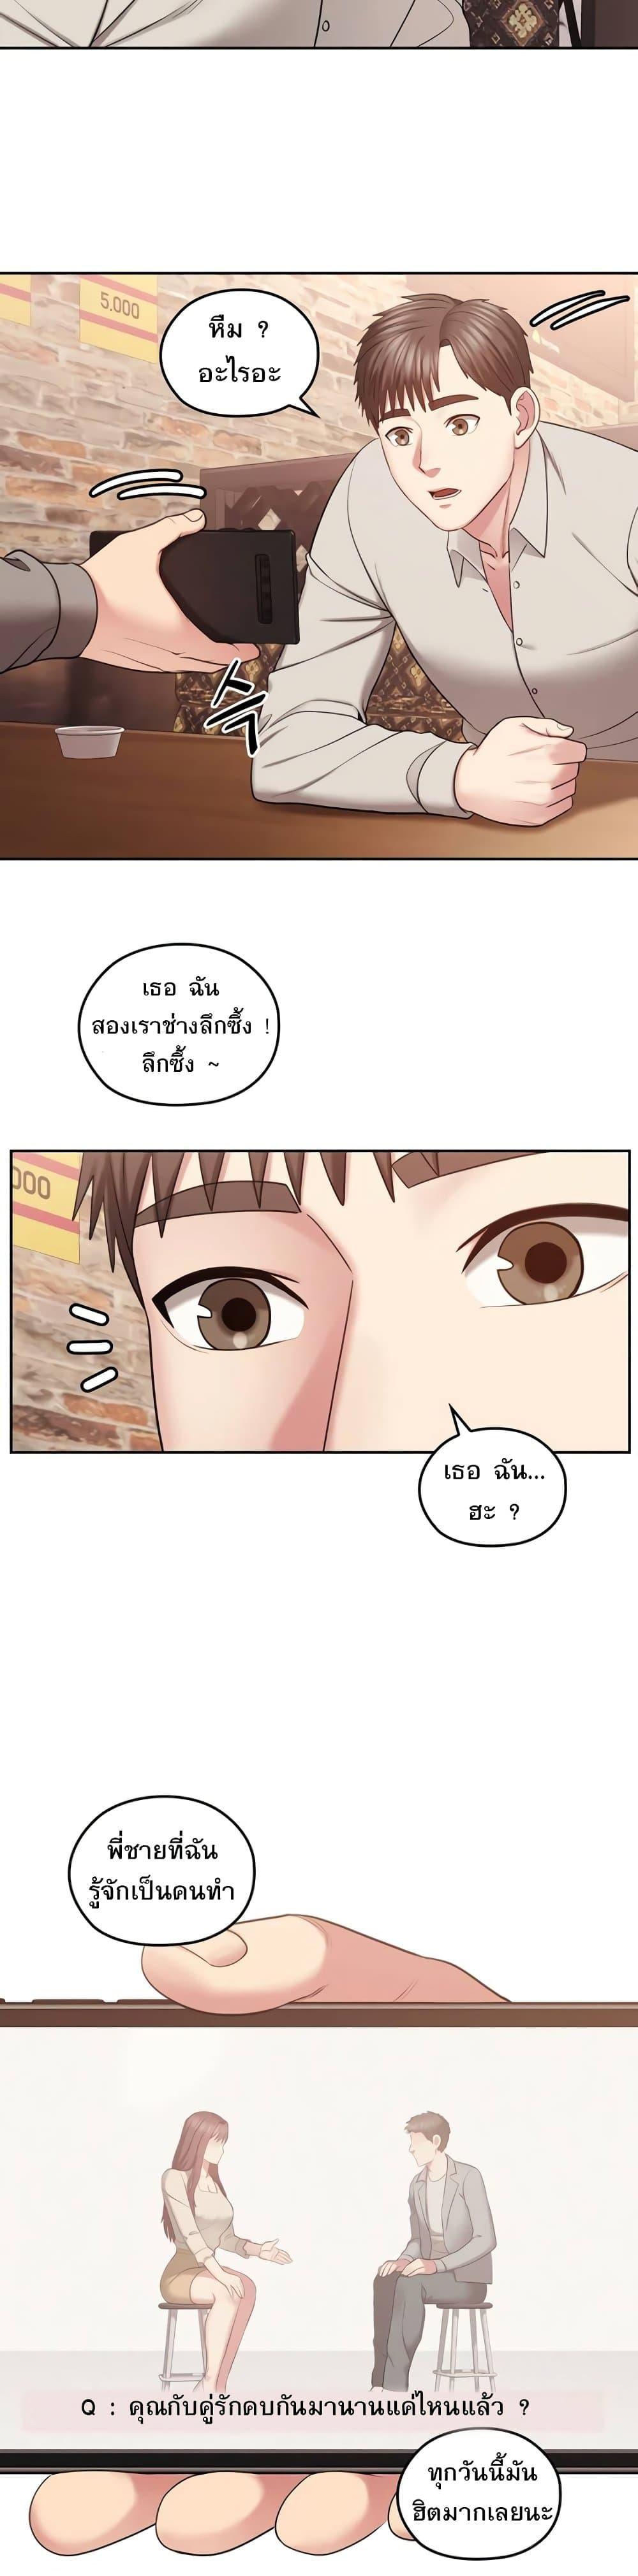 Sexual Consulting 2 ภาพ 17